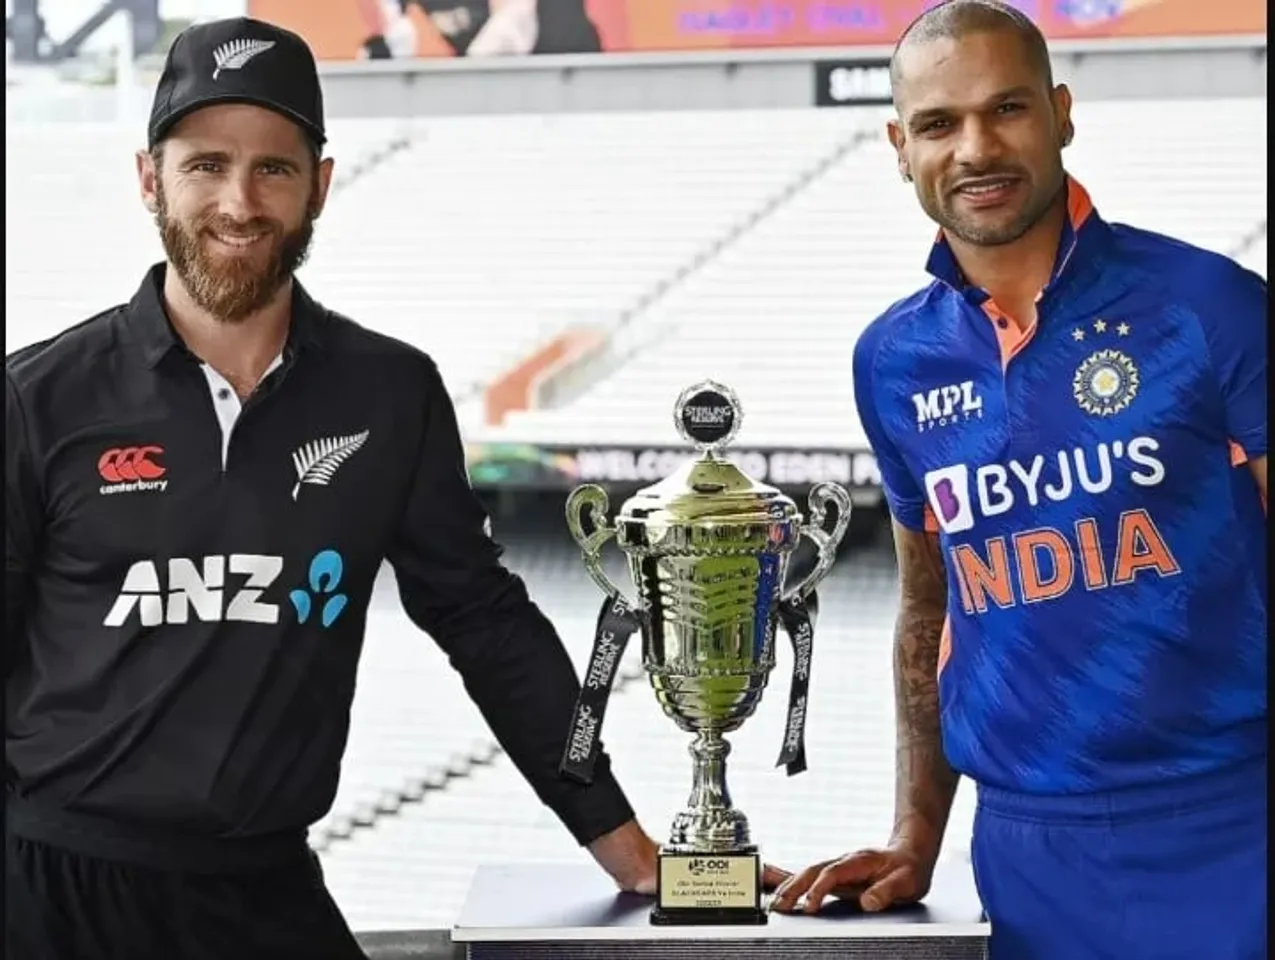 New Zealand vs India | 2nd ODI: Full Preview, Lineups, Pitch Report, And Dream11 Team Prediction | Sportz Point